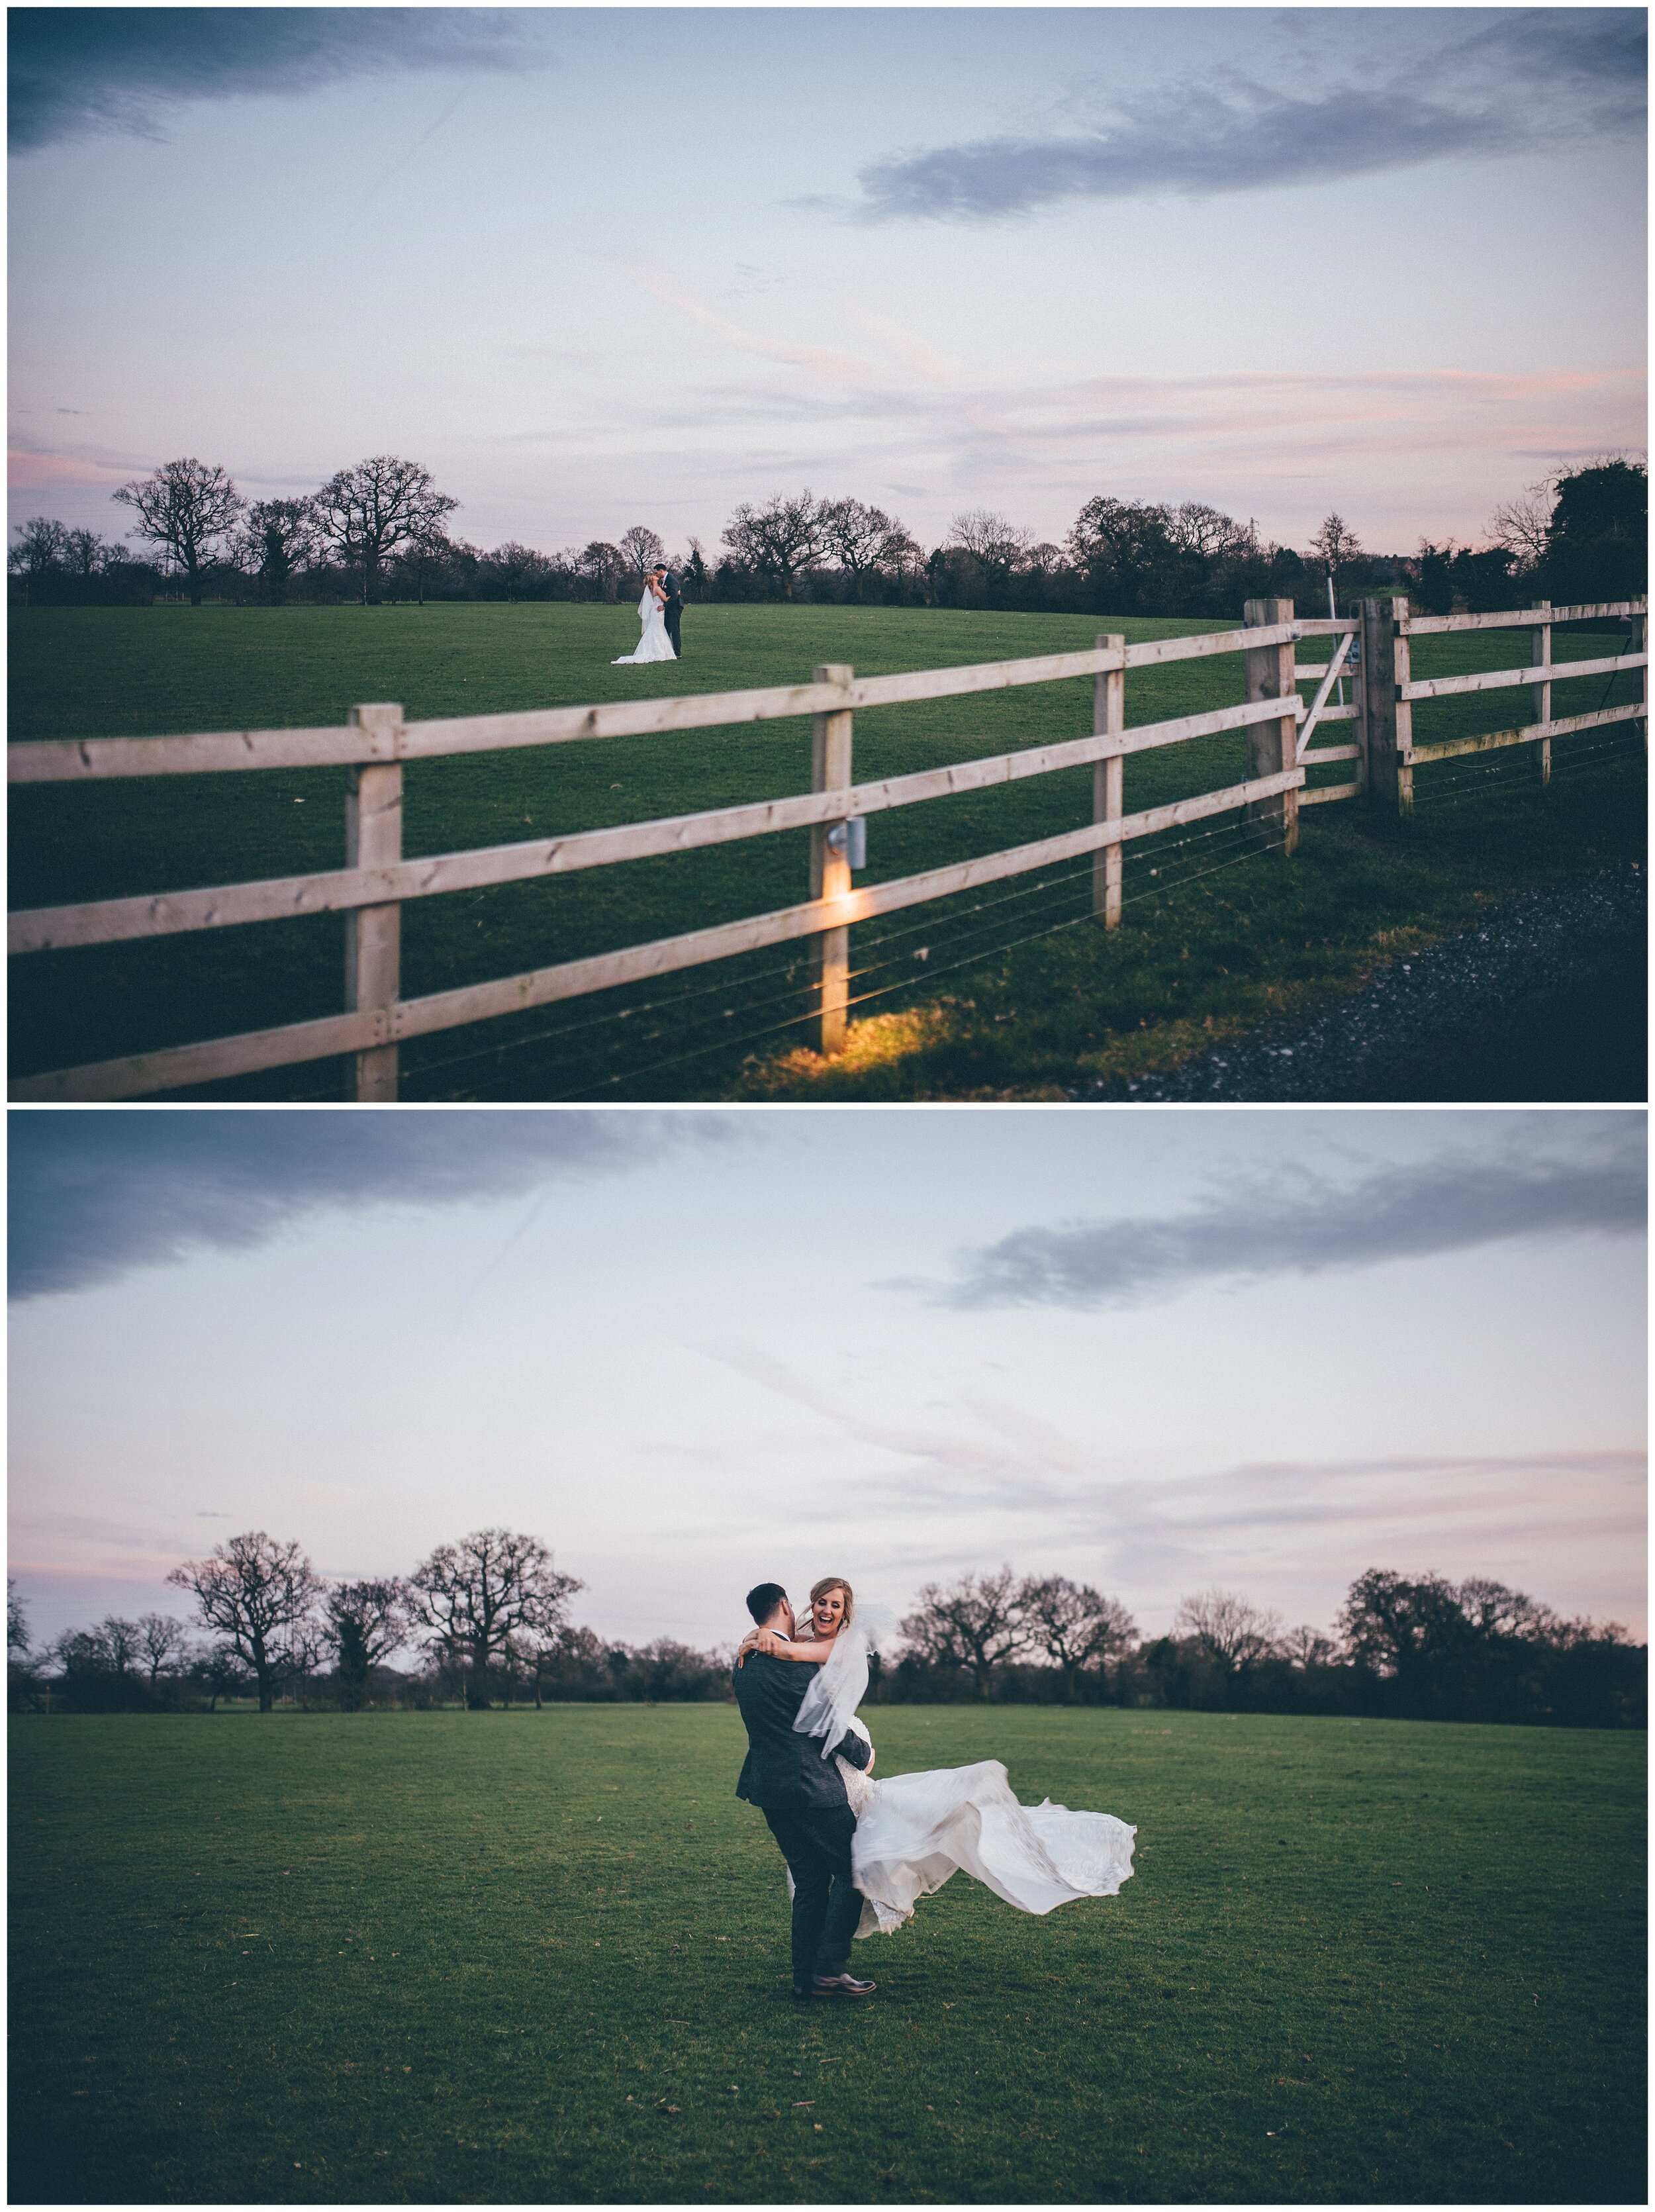 Newlyweds have their wedding photographs taken in a field at dusk.